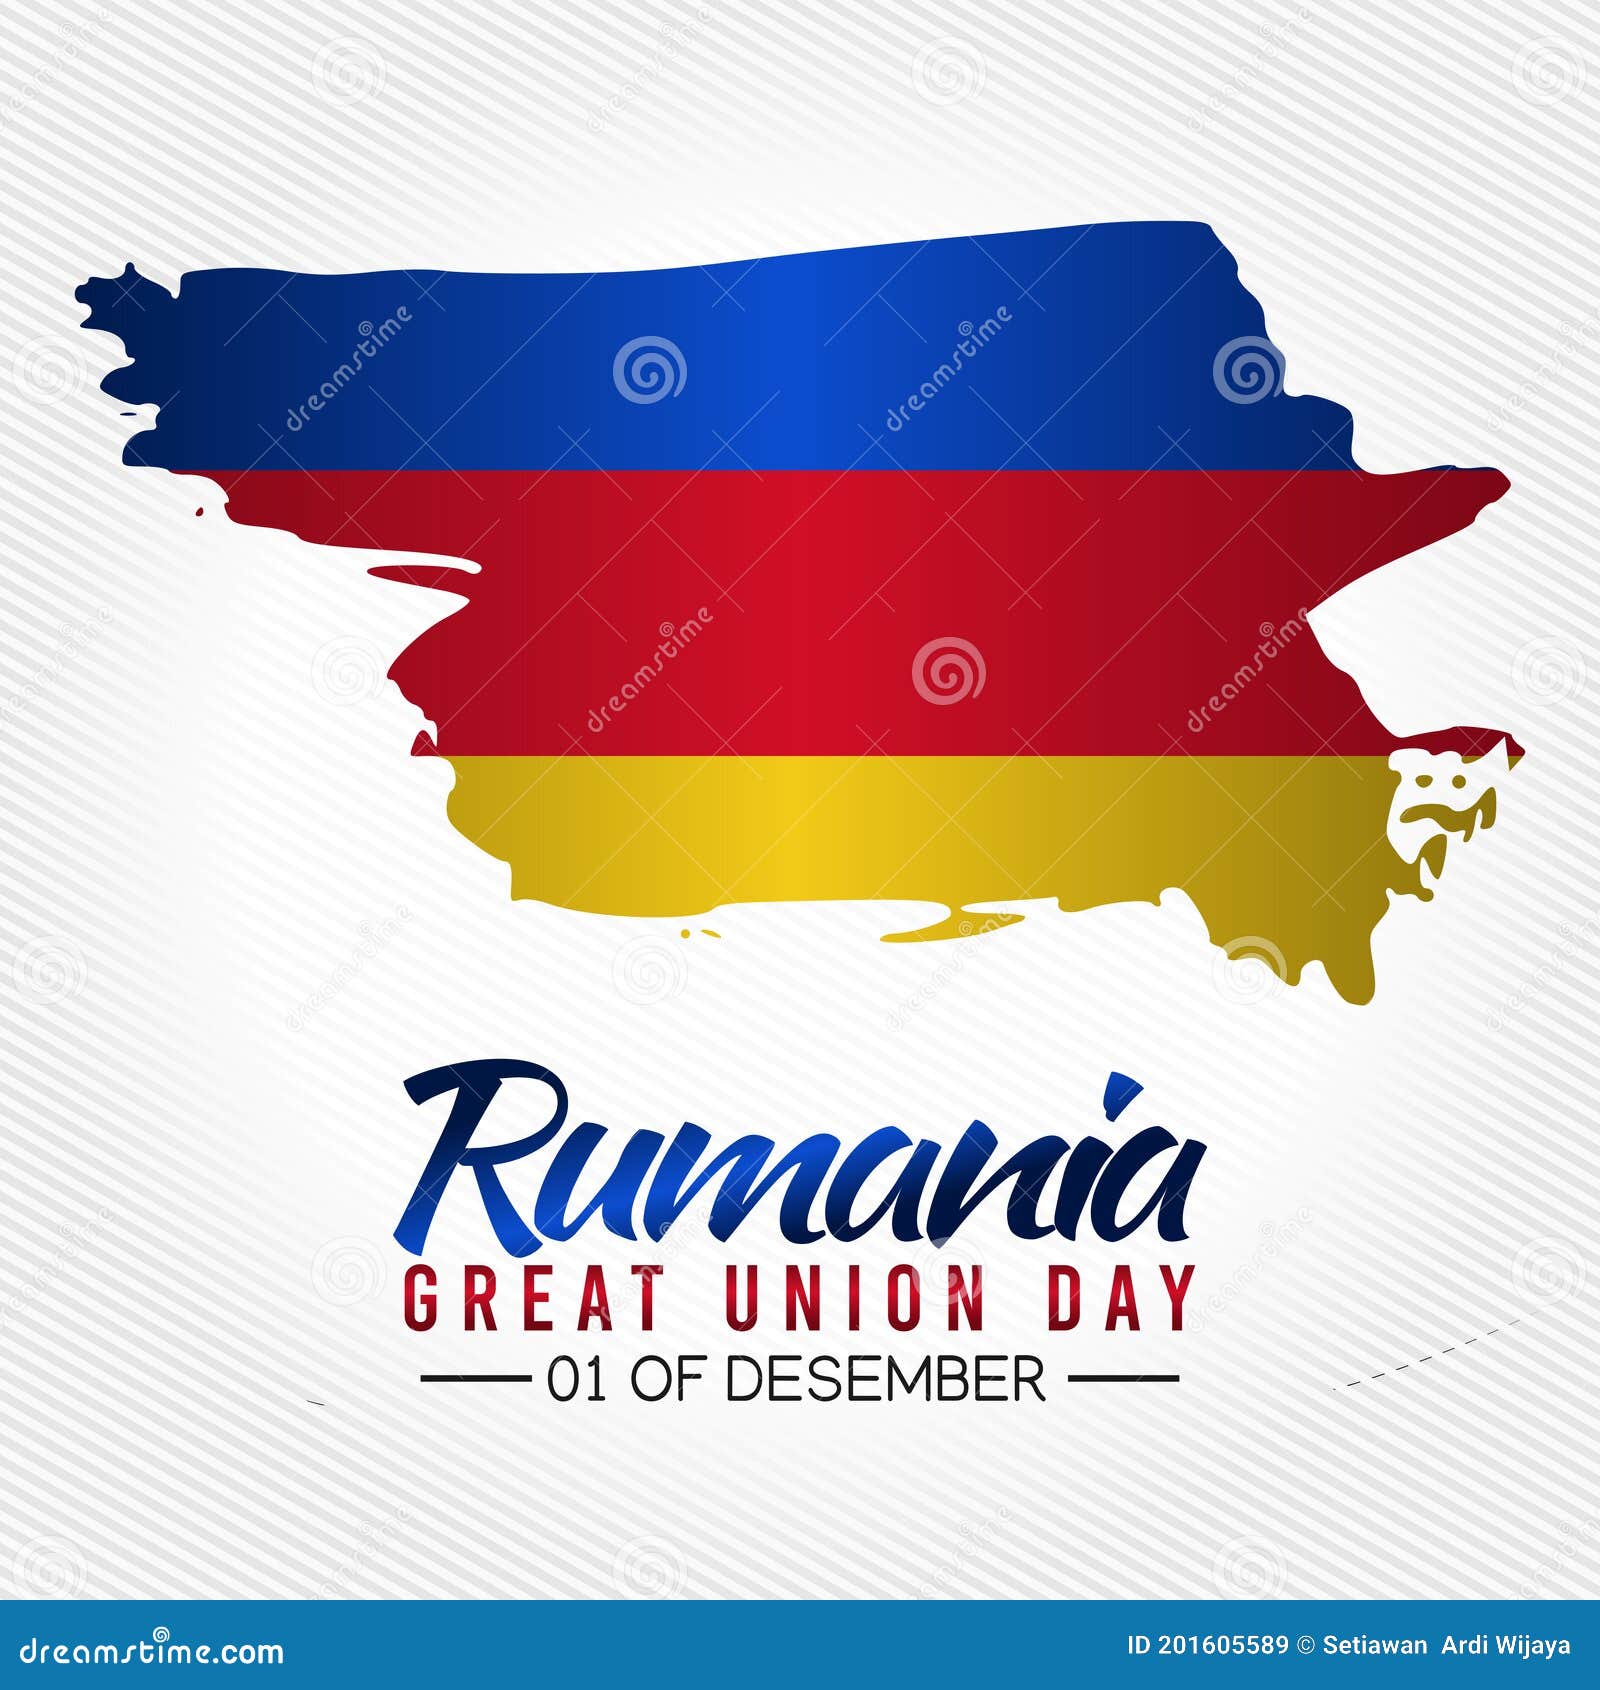  graphic of rumania great union day